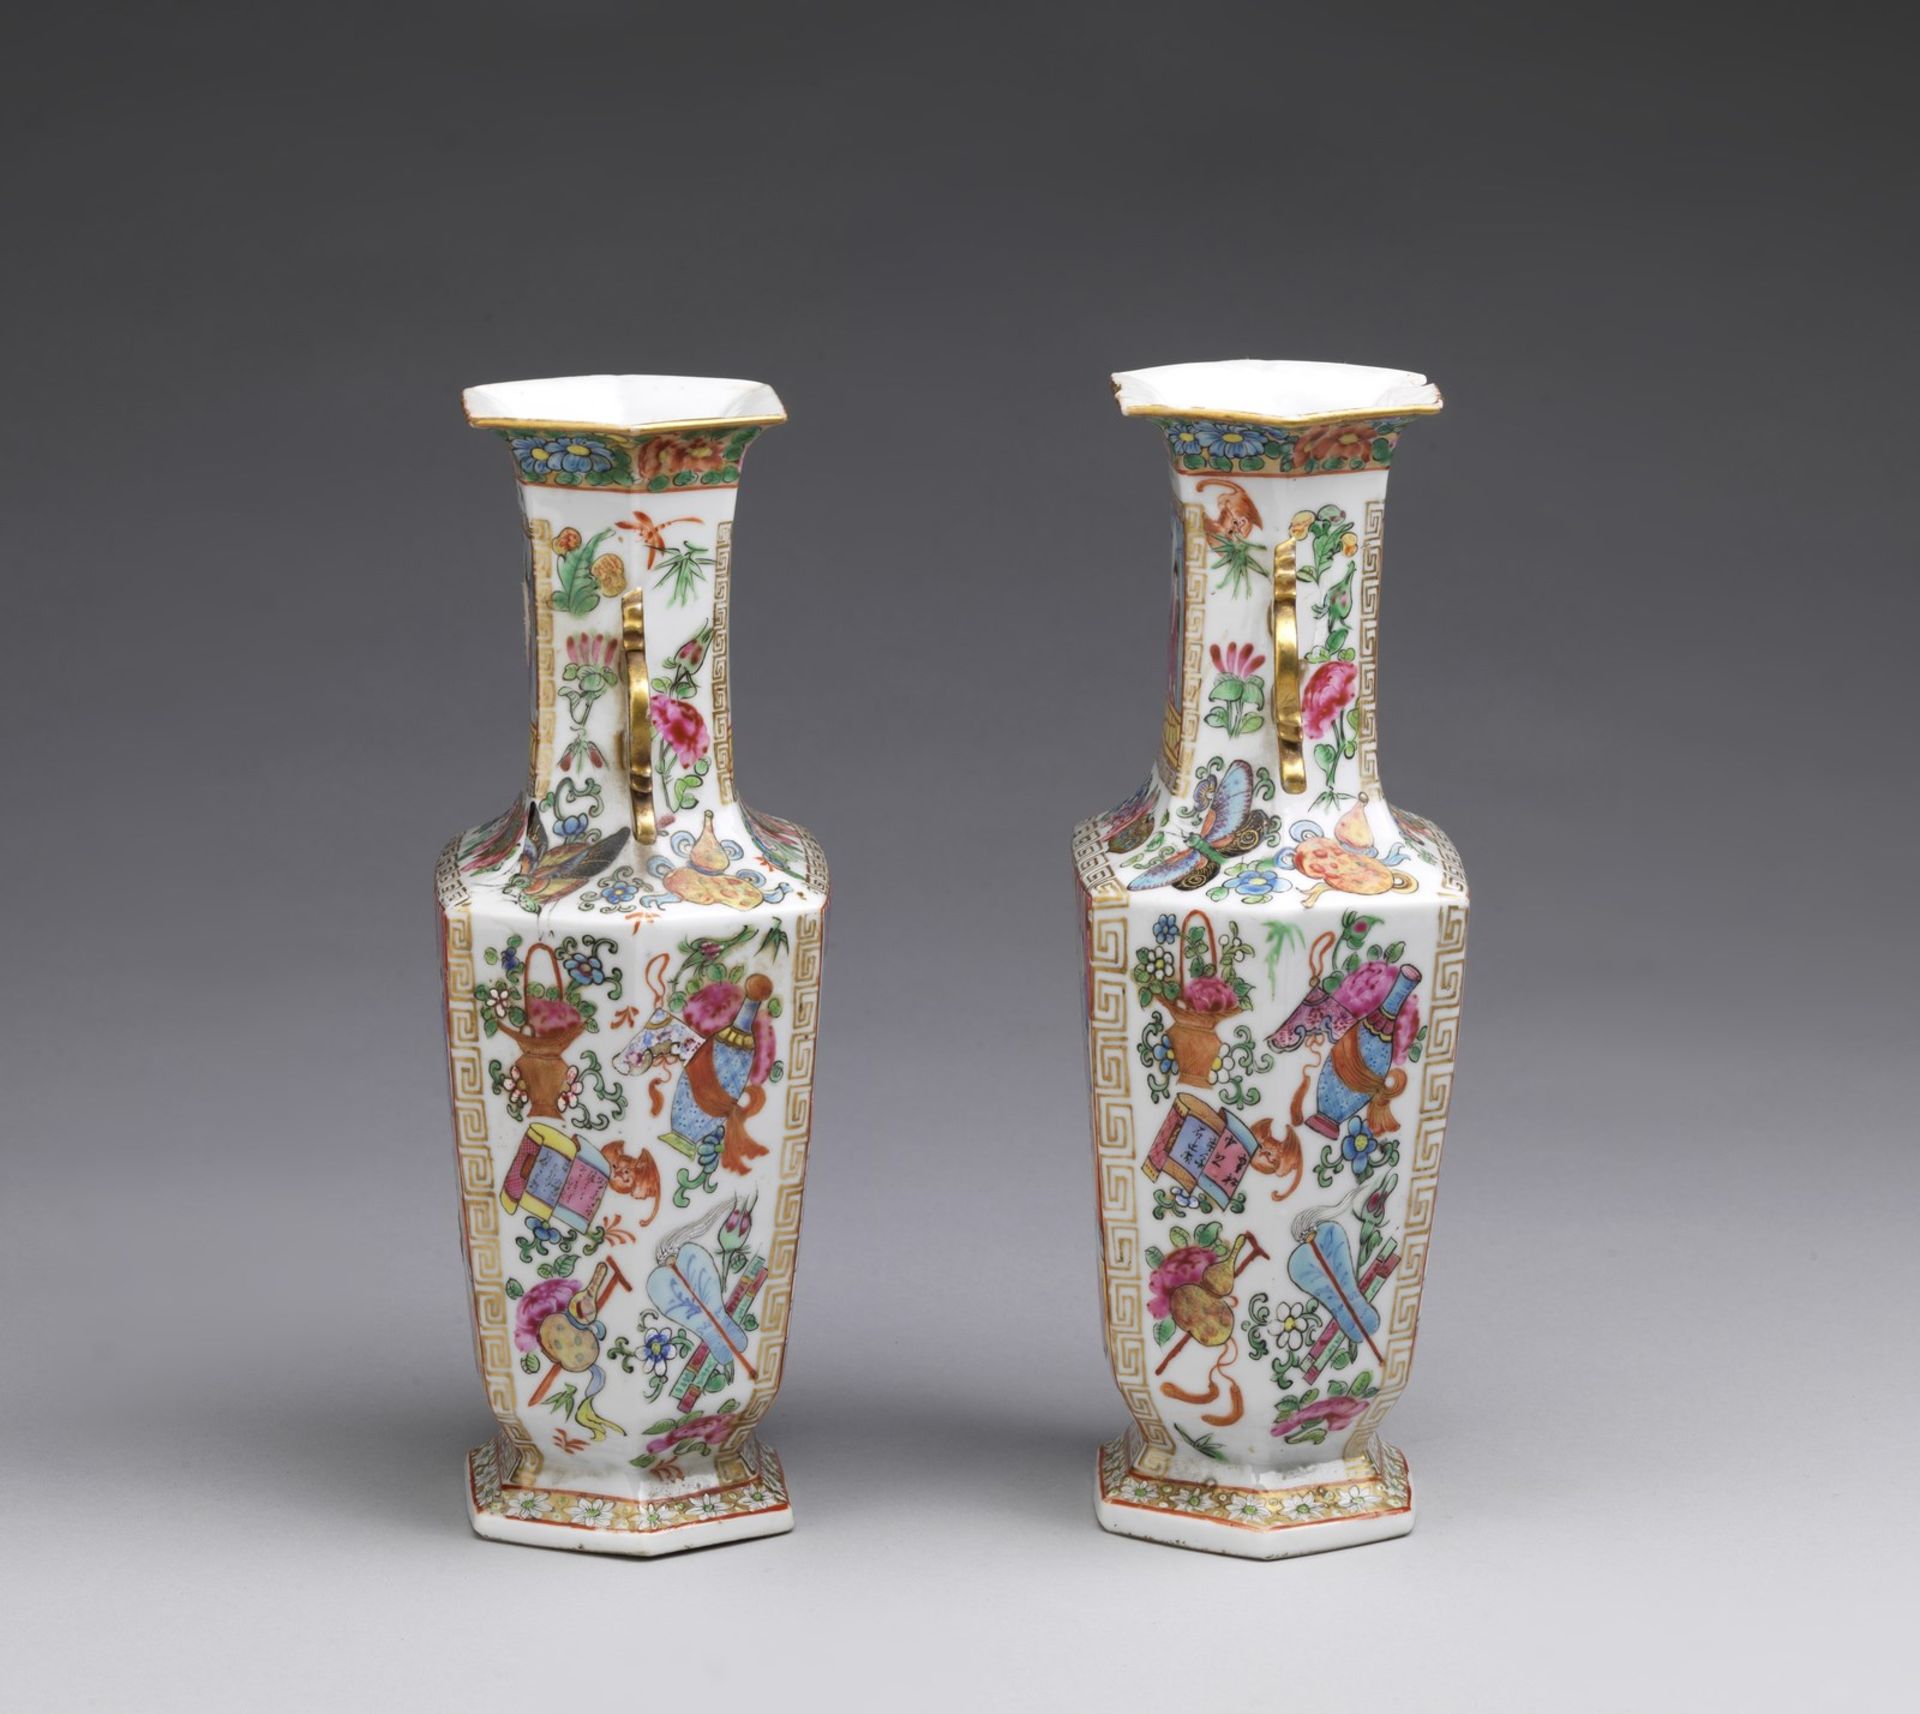 Arte Cinese A pair of porcelain Canton faceted vasesChina, Qing dynasty, early 19th century . - Image 3 of 4